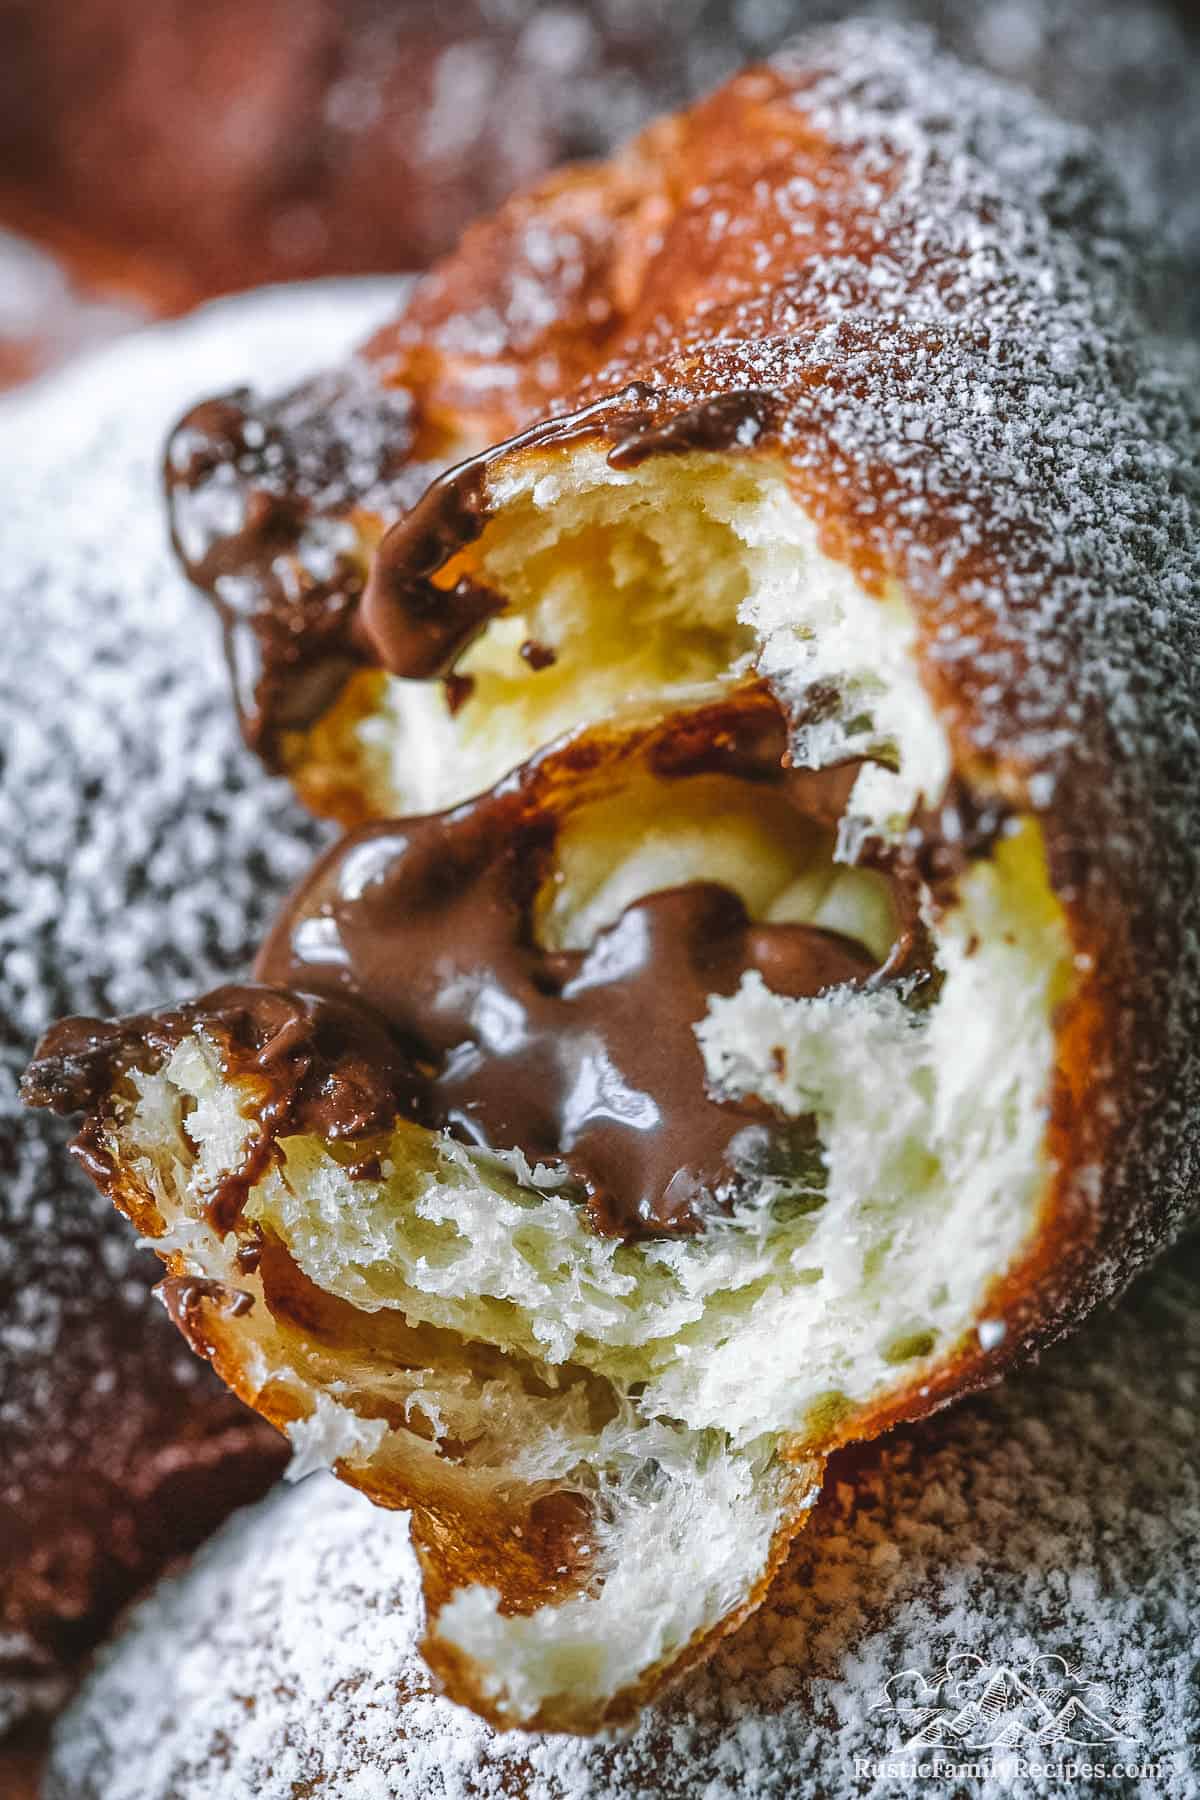 Close up of a beignet with a bite taken out and nutella oozing out